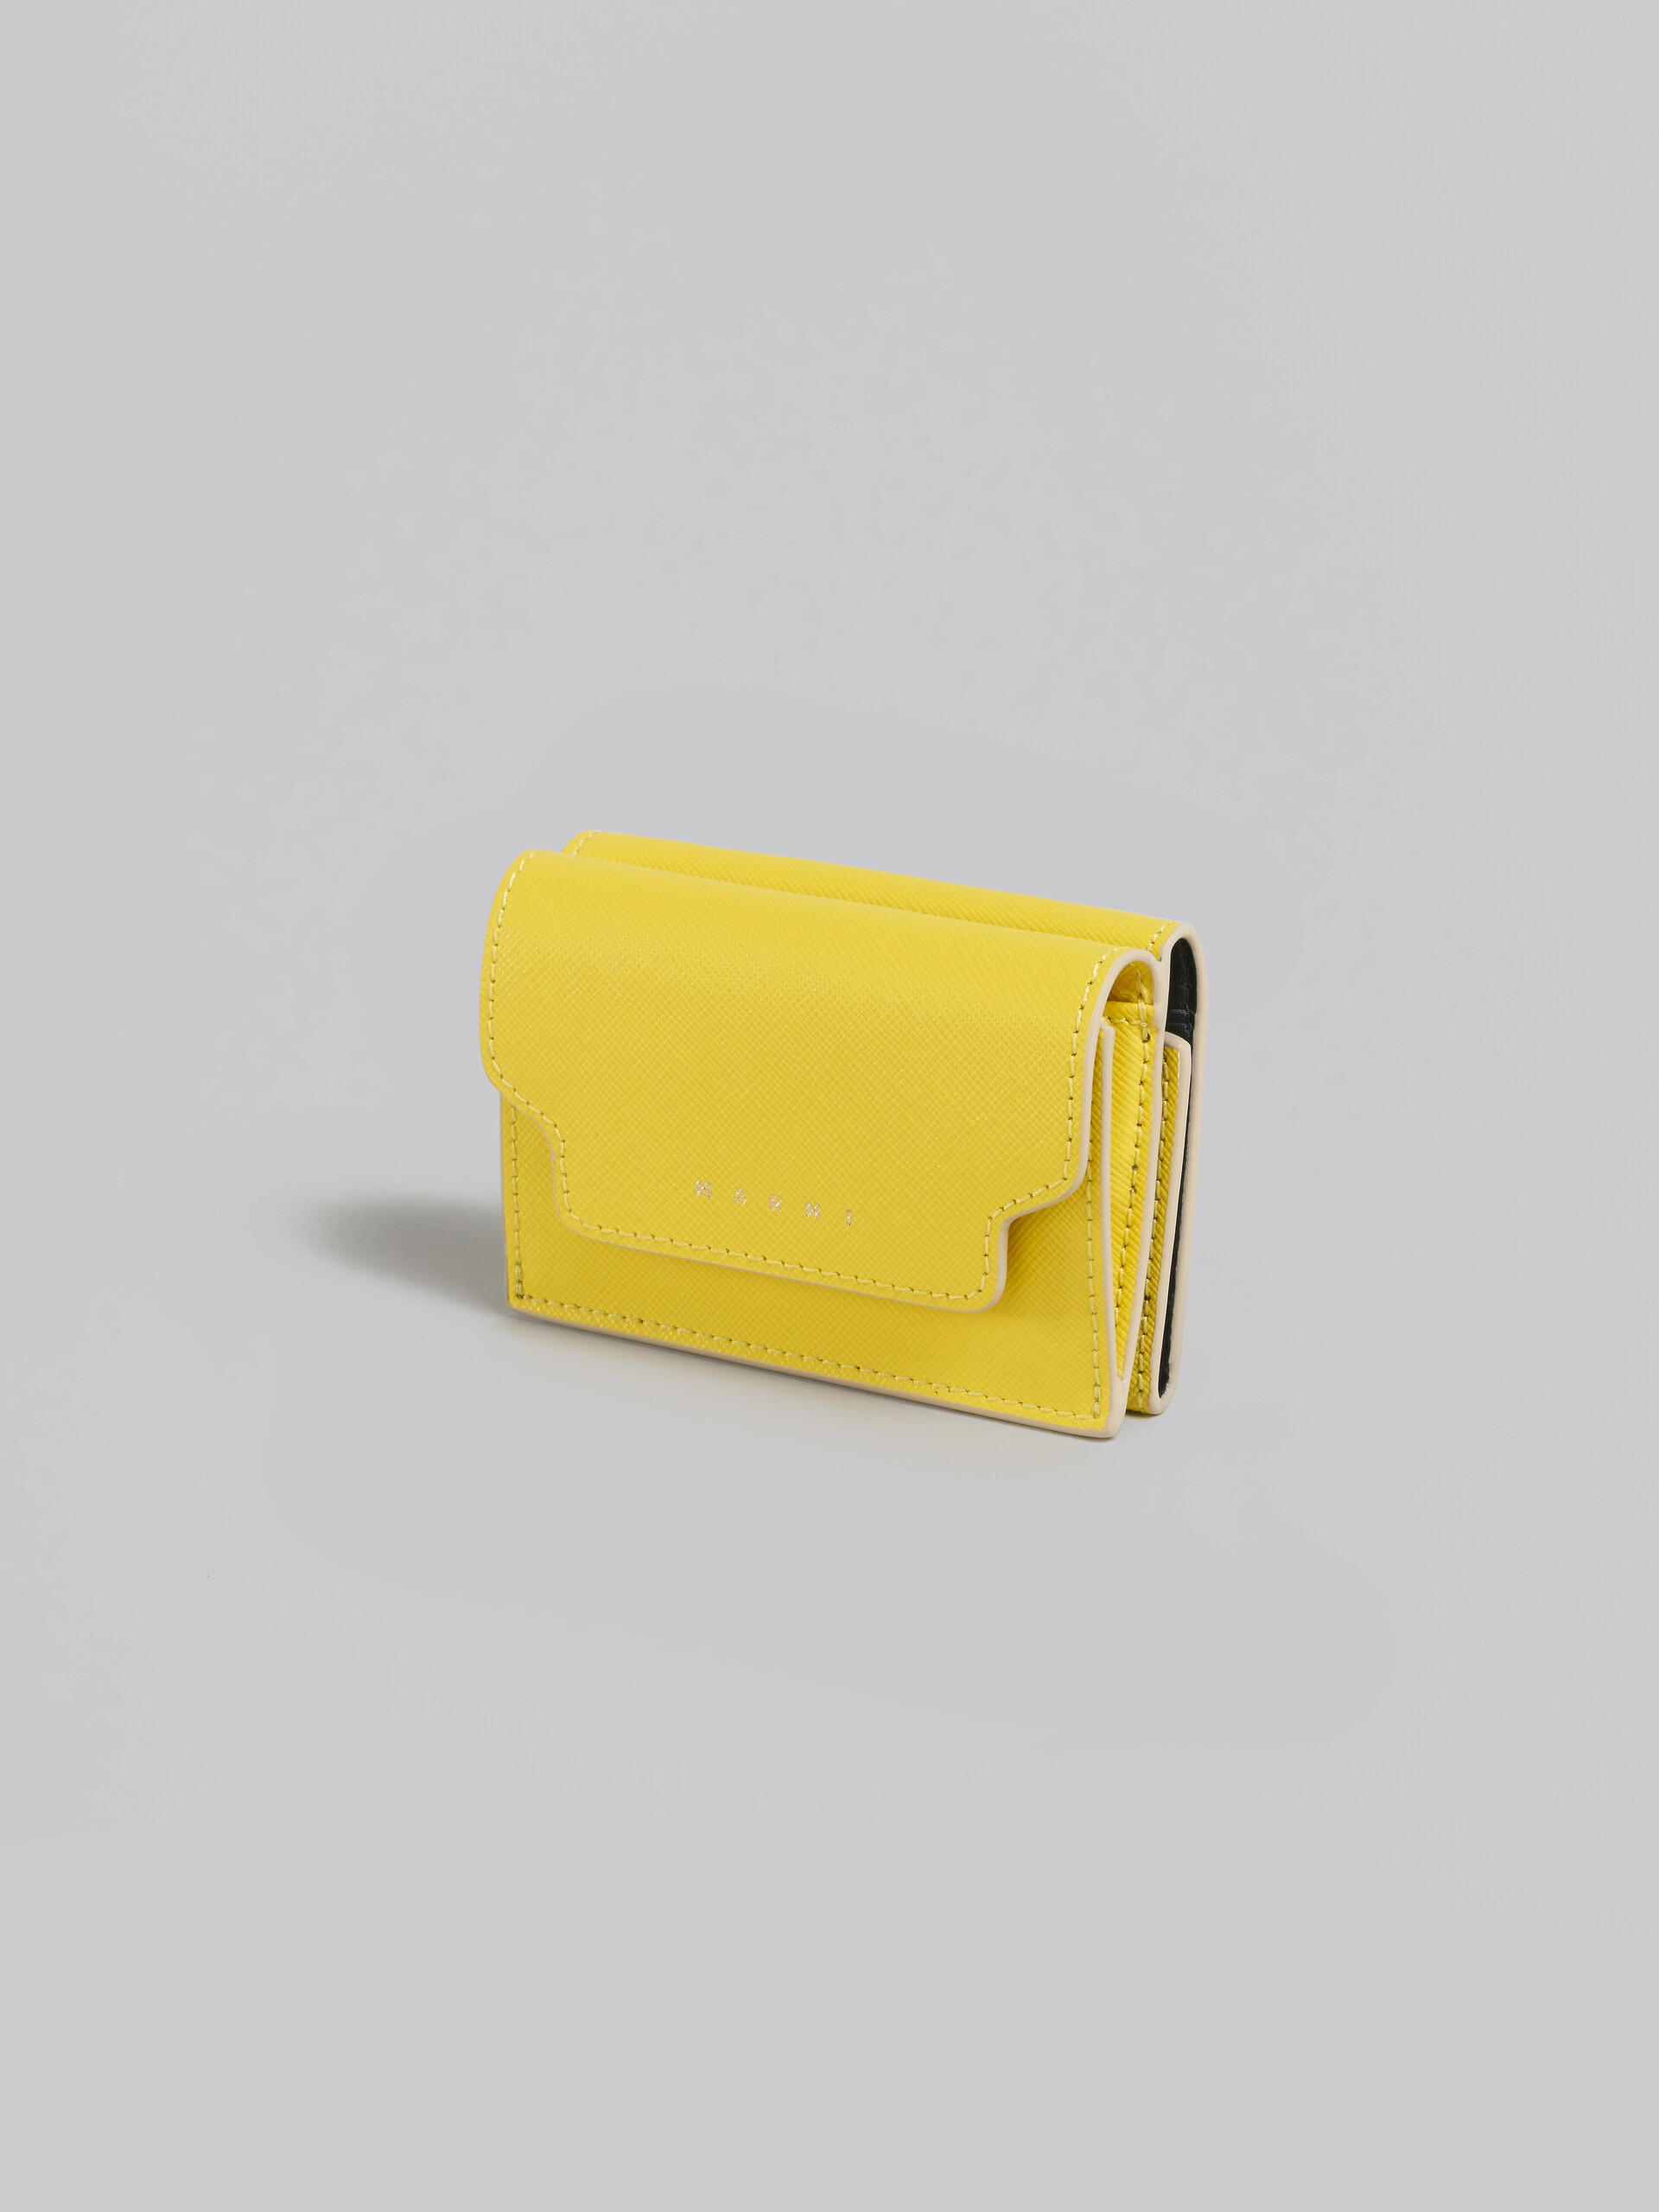 Yellow saffiano leather tri-fold wallet - Wallets - Image 4